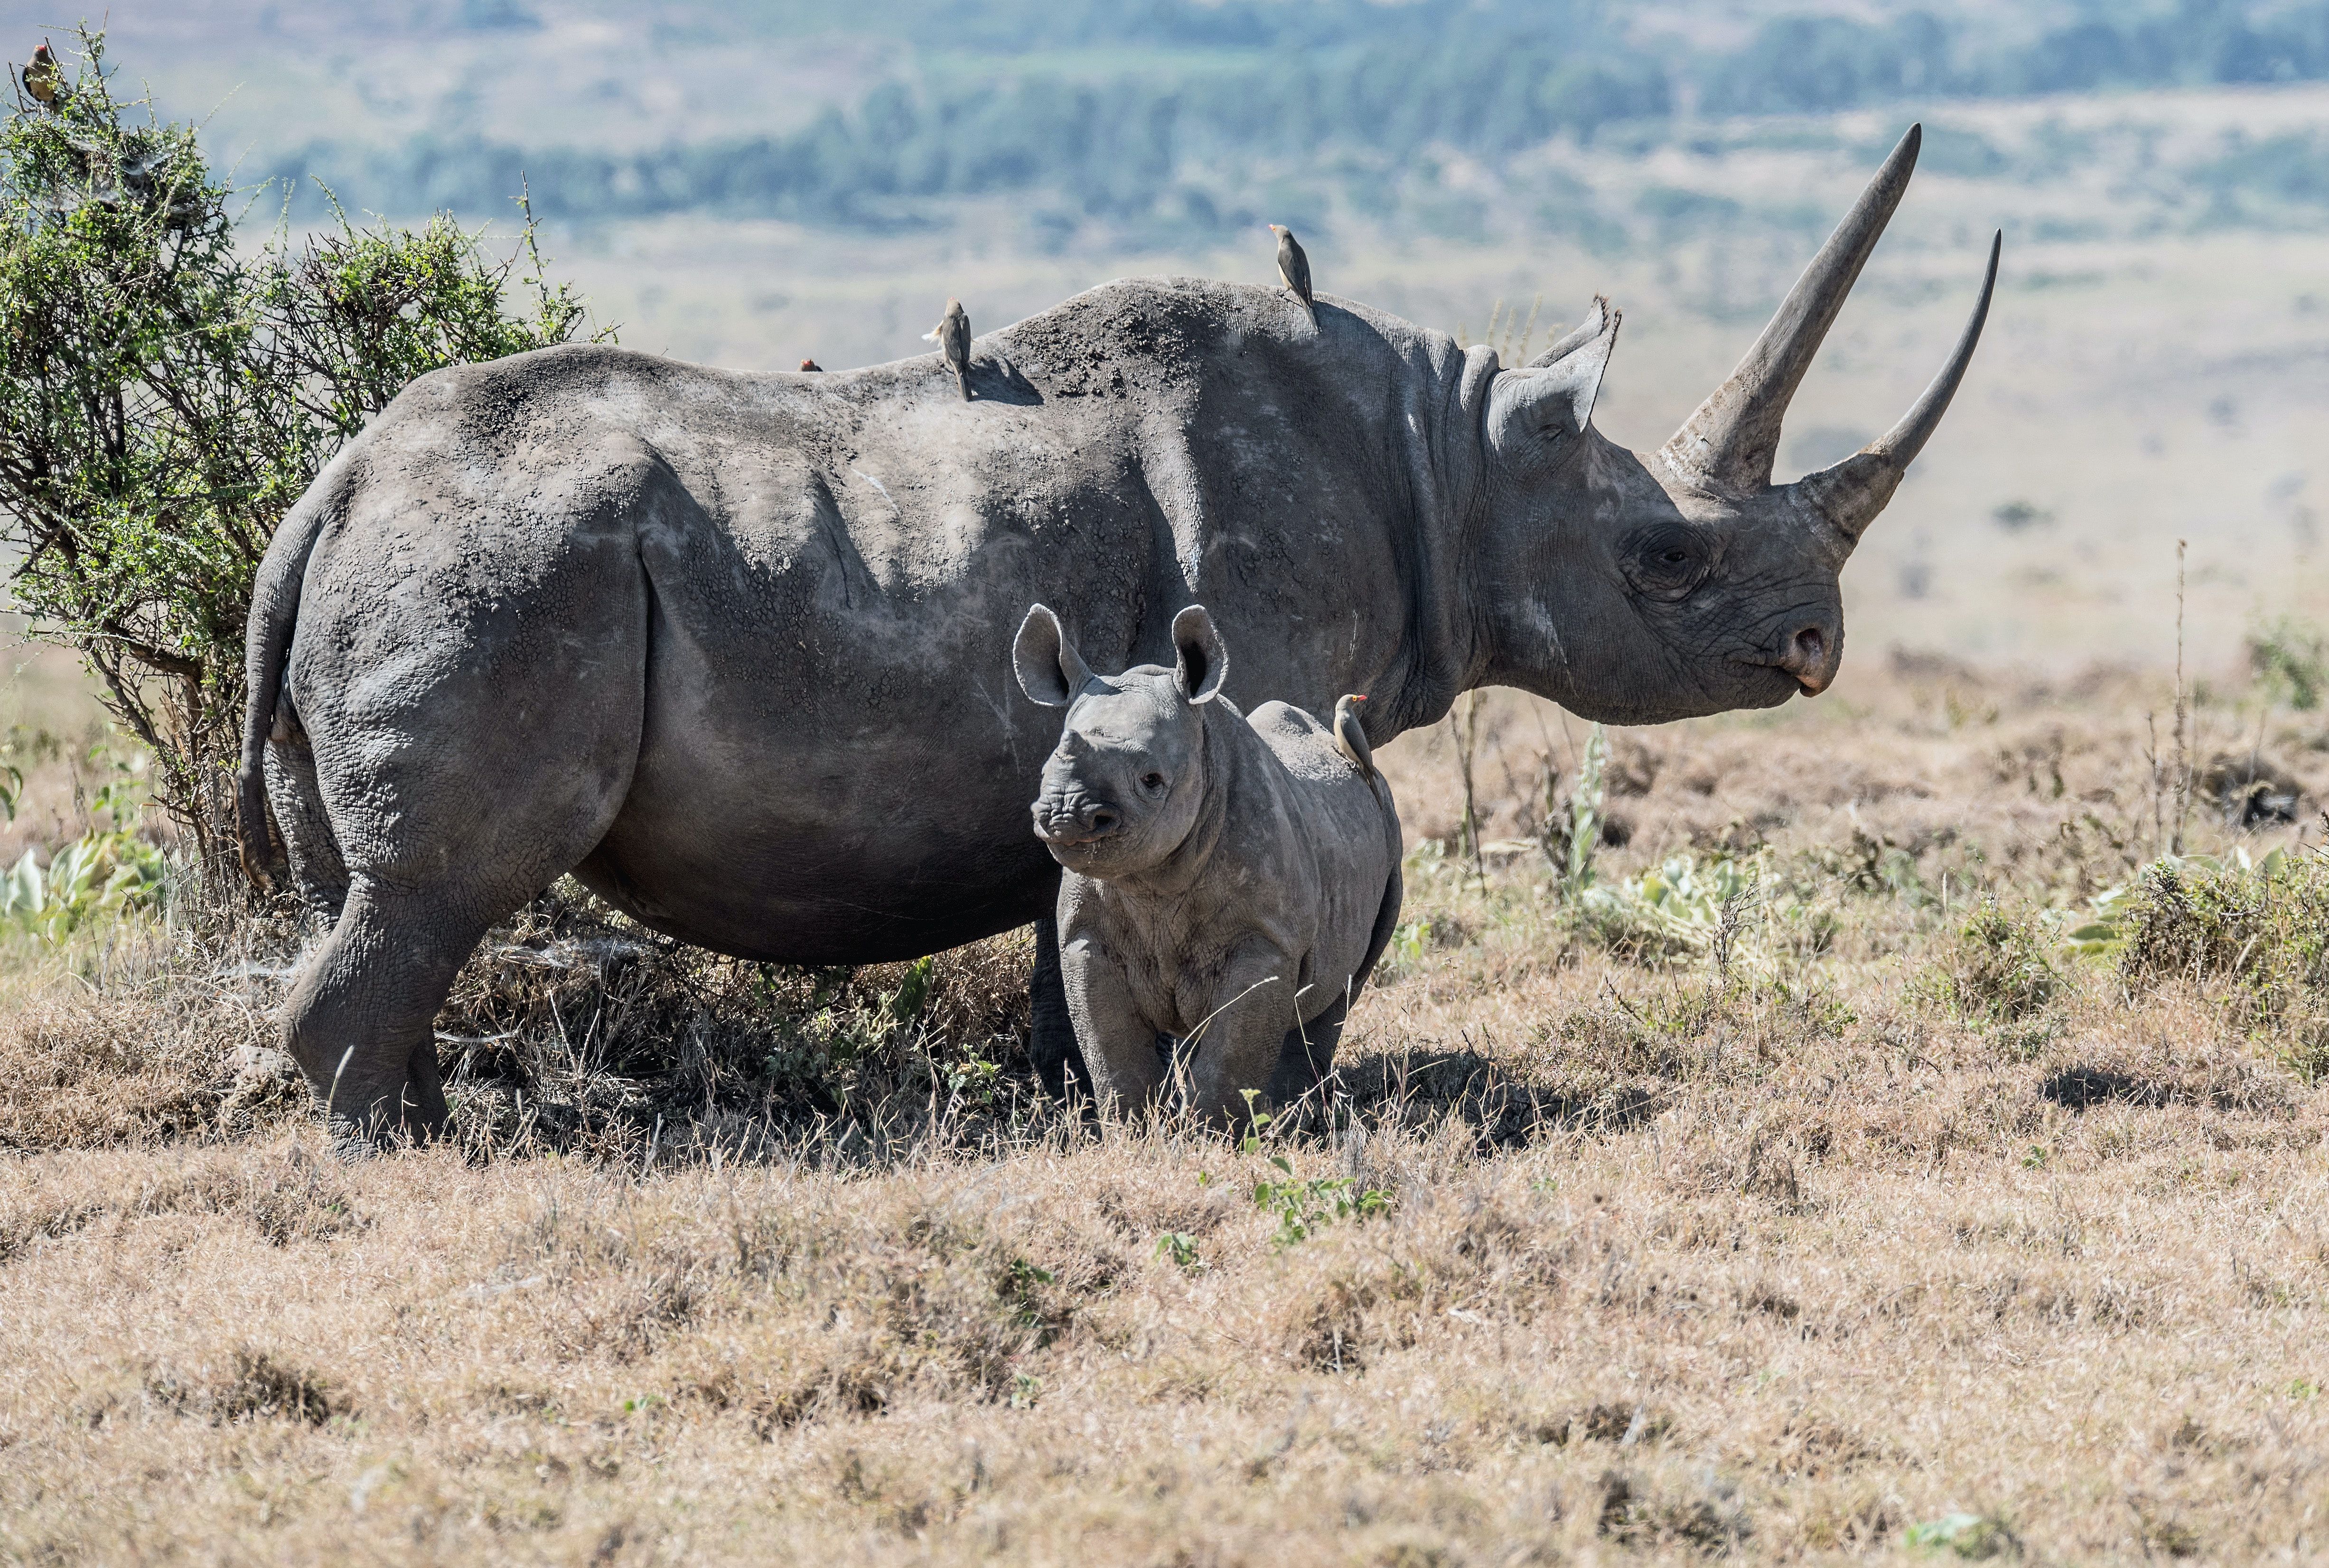 Rhinoceros in the safari with her baby